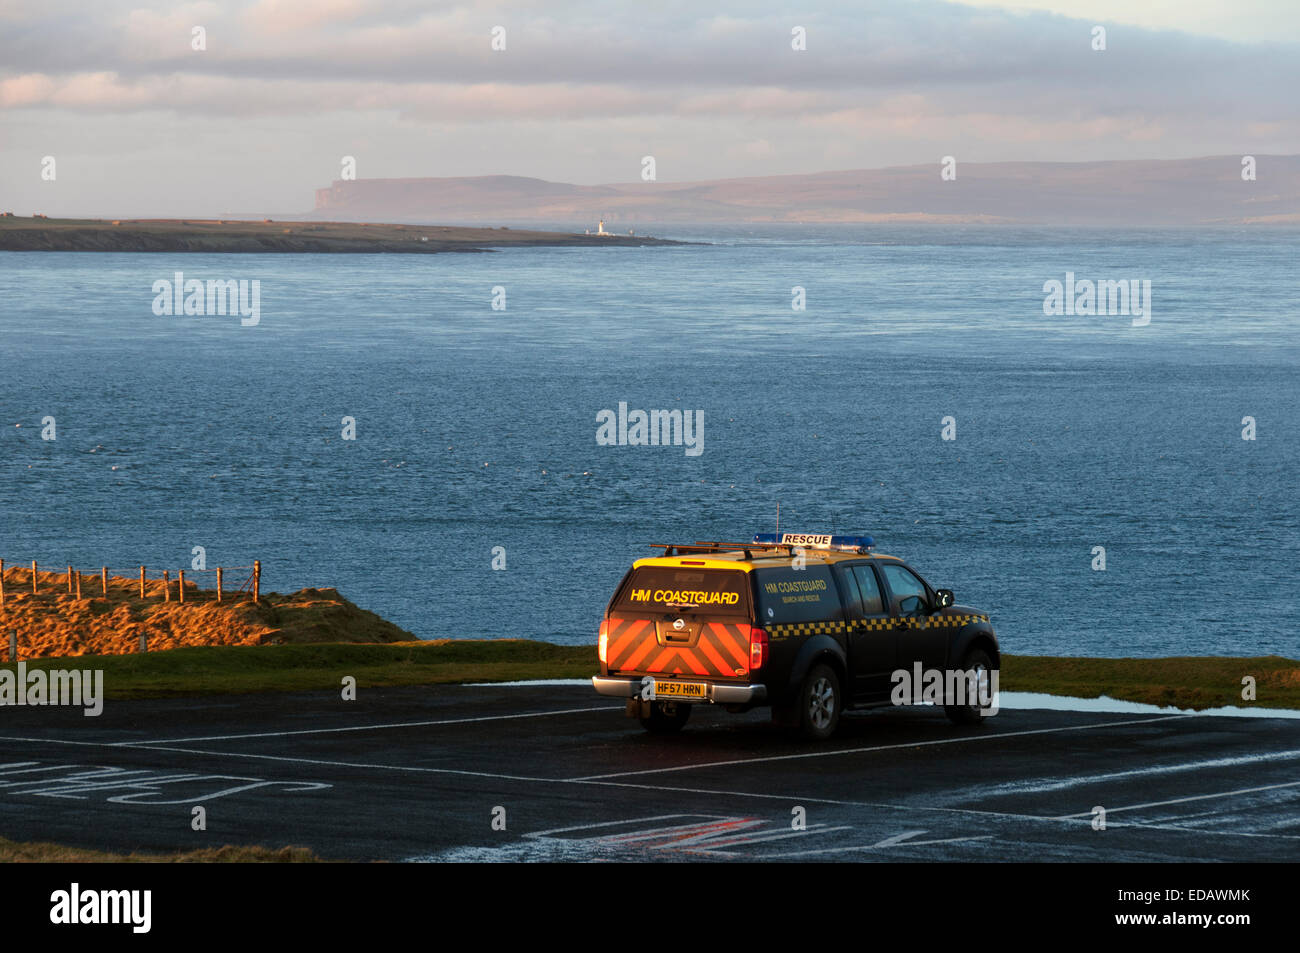 Duncansby Head, Caithness, Scotland. 04th Jan, 2015. HM Coastguard vehicle at Duncansby Head as the search continues for the missing crew from the cargo ship Cemfjord which sank in the Pentland Firth yesterday.  In the distance, over the Pentland Firth, is Hoy in the Orkney Isles and the island of Stroma with its lighthouse. At Duncansby Head, Caithness, Scotland. Stock Photo